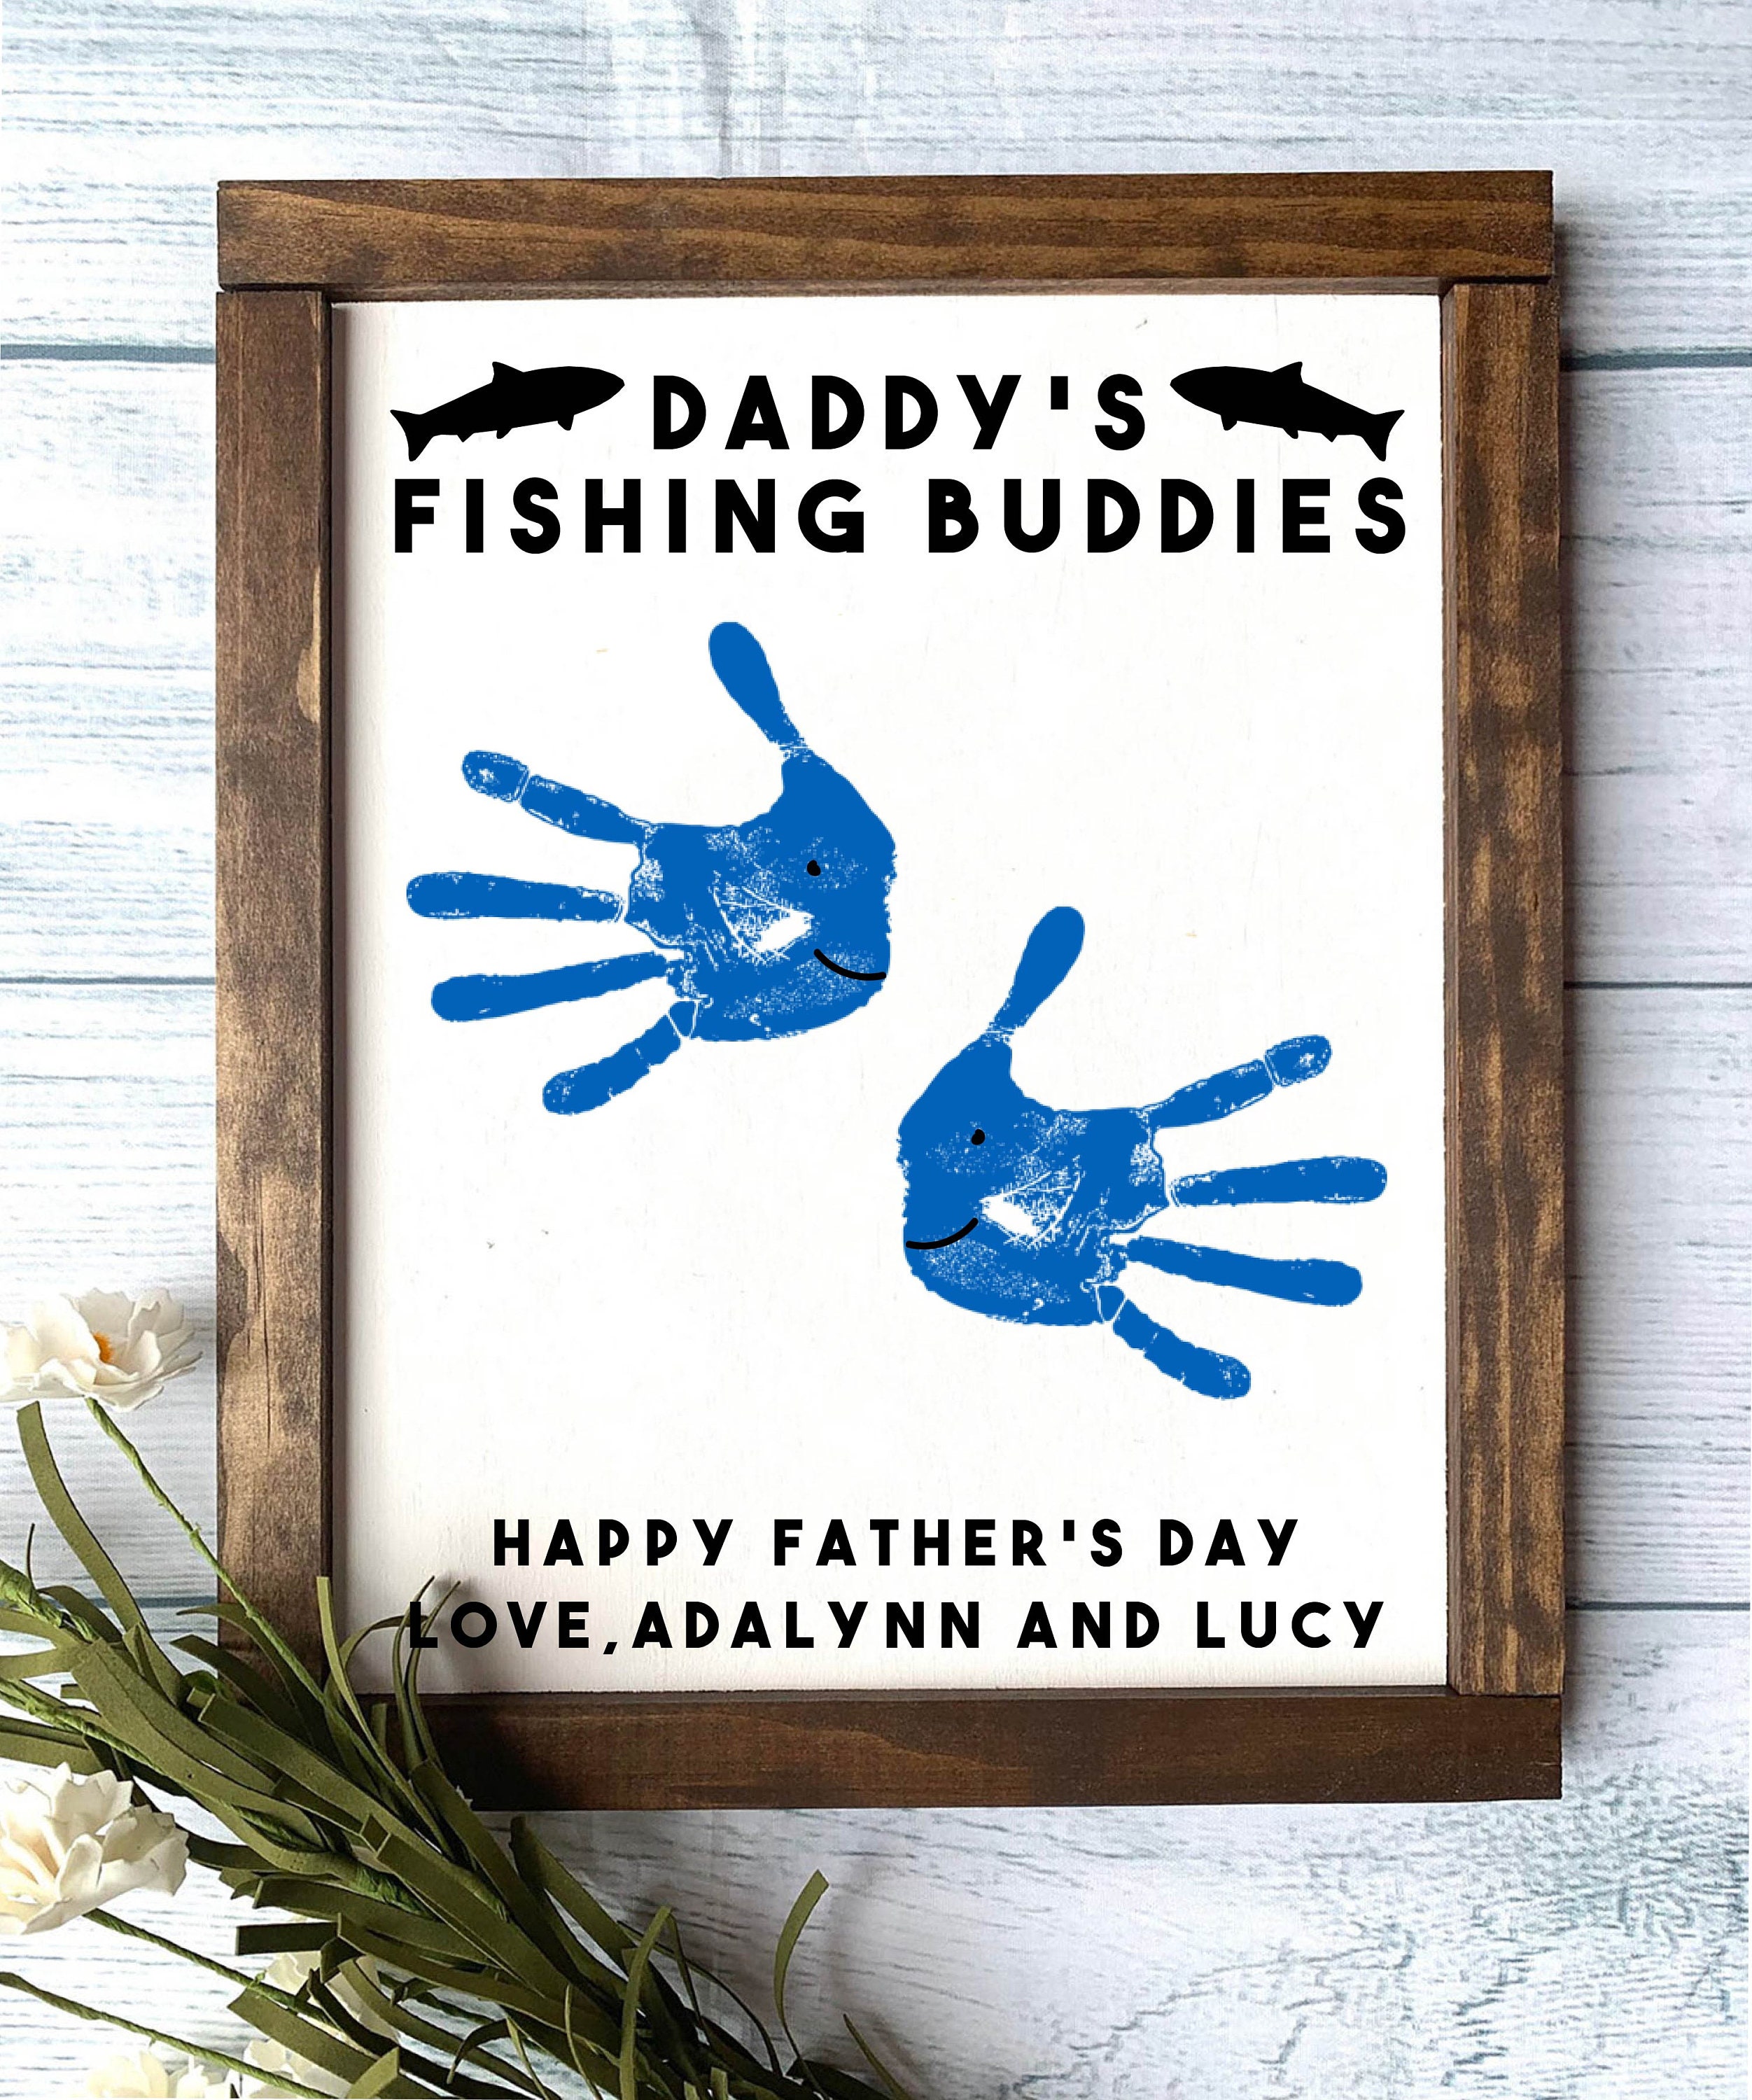 Daddy's Fishing Buddies - Father's Day Gift, Father's Day Wooden Sign, DIY  Handprint Sign, Gifts for dad, Child's Handprint Sign, DIY Kit